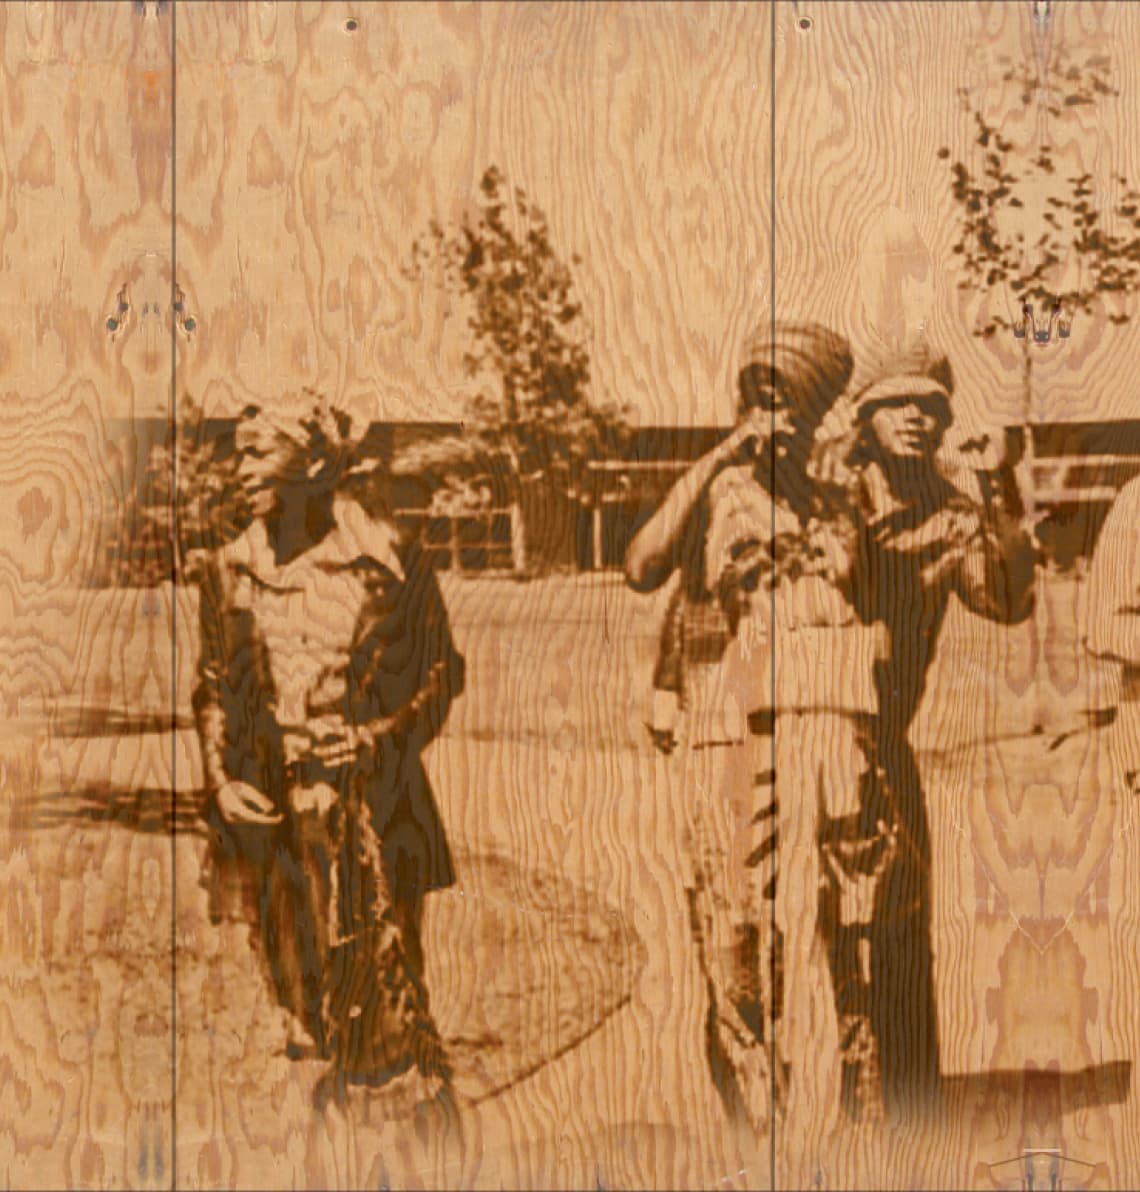 Historical images of the original UC San Diego campus etched on wood for UC San Diego Sixth College dining hall by RSM Design in San Diego, California.